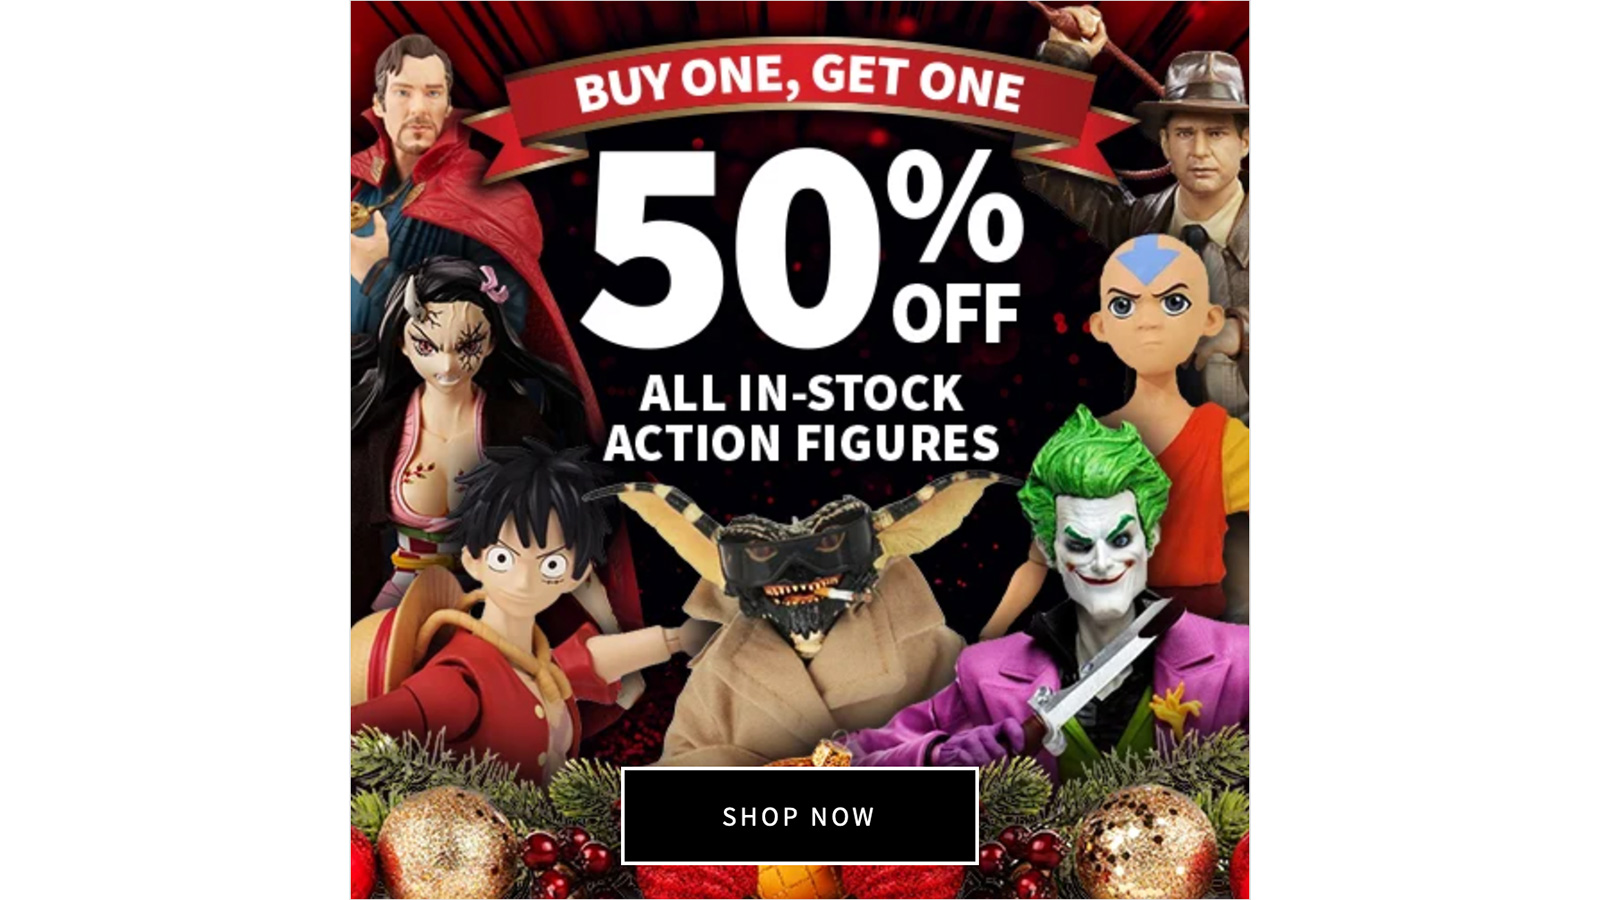 Buy 1 Get 1 50% Off All In Stock Action Figures At Entertainment Earth